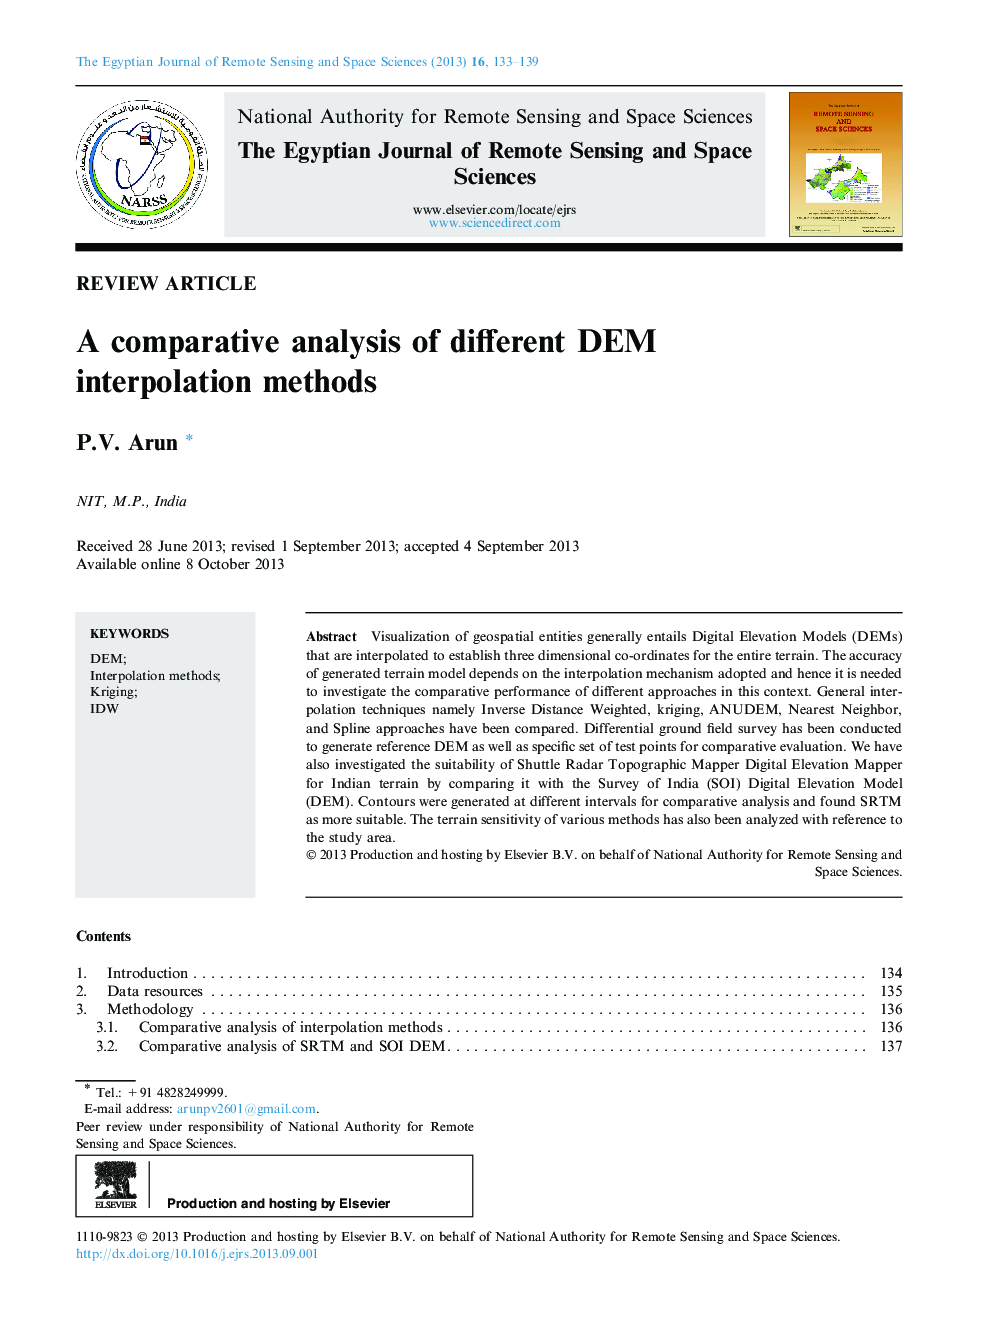 A comparative analysis of different DEM interpolation methods 